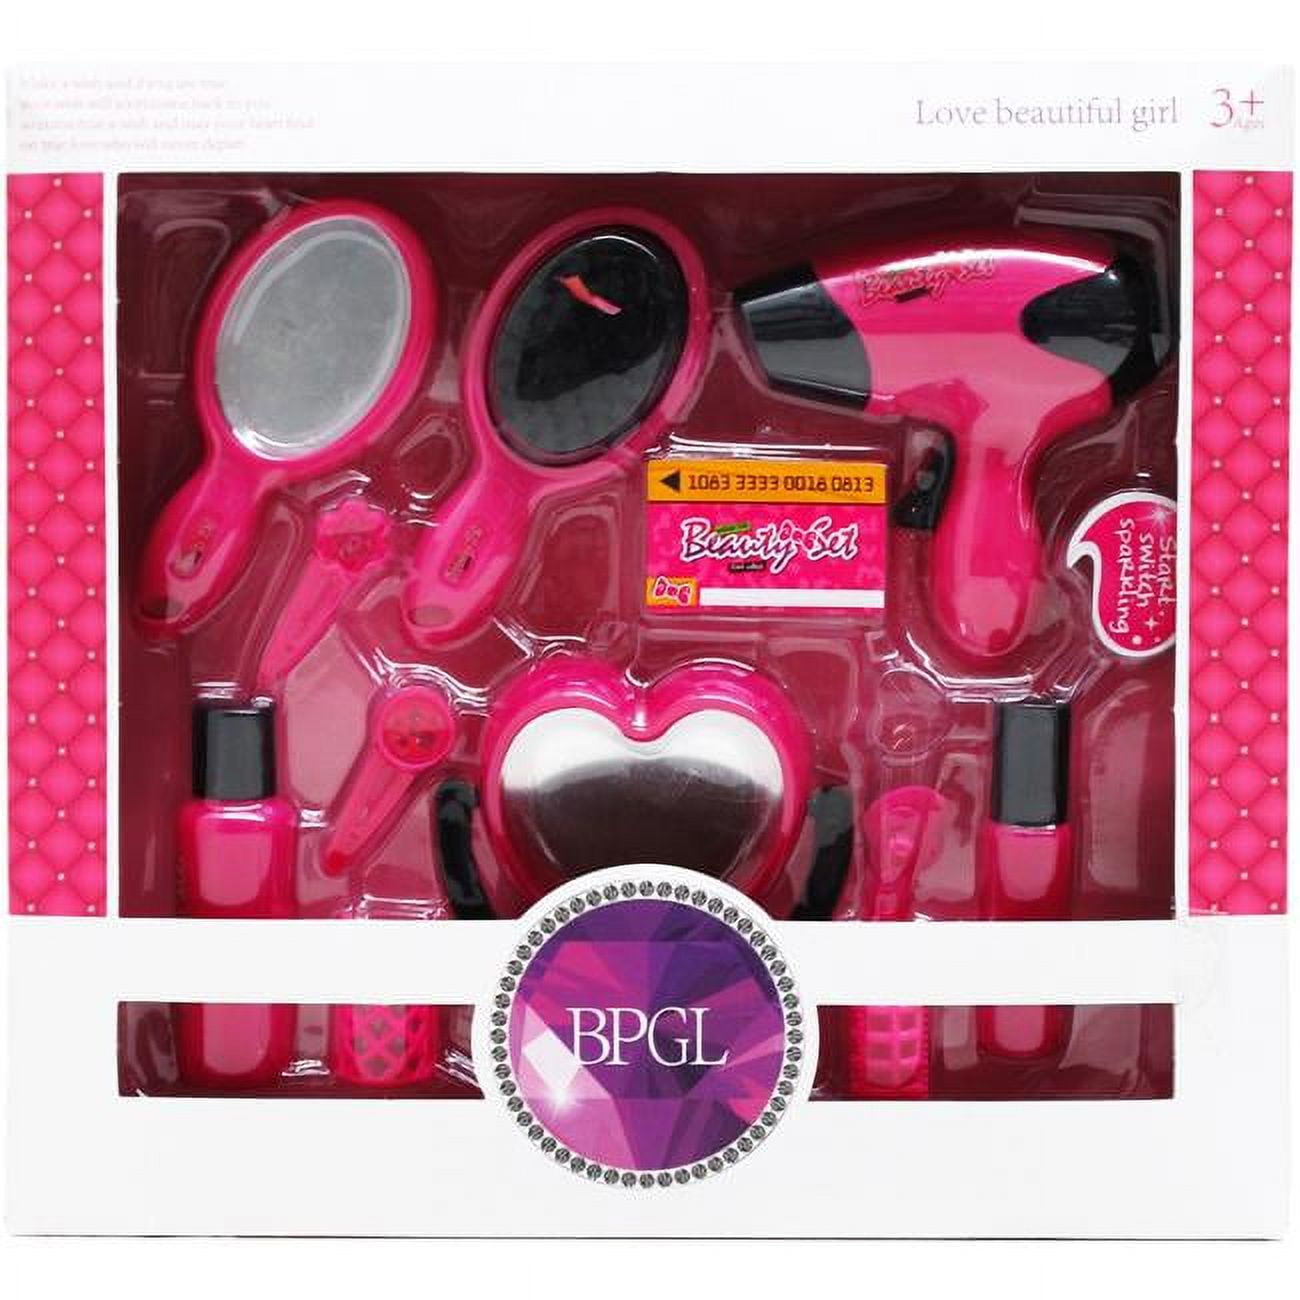 Picture of DDI 2340946 Beauty Play Set - 12 Piece - Case of 12